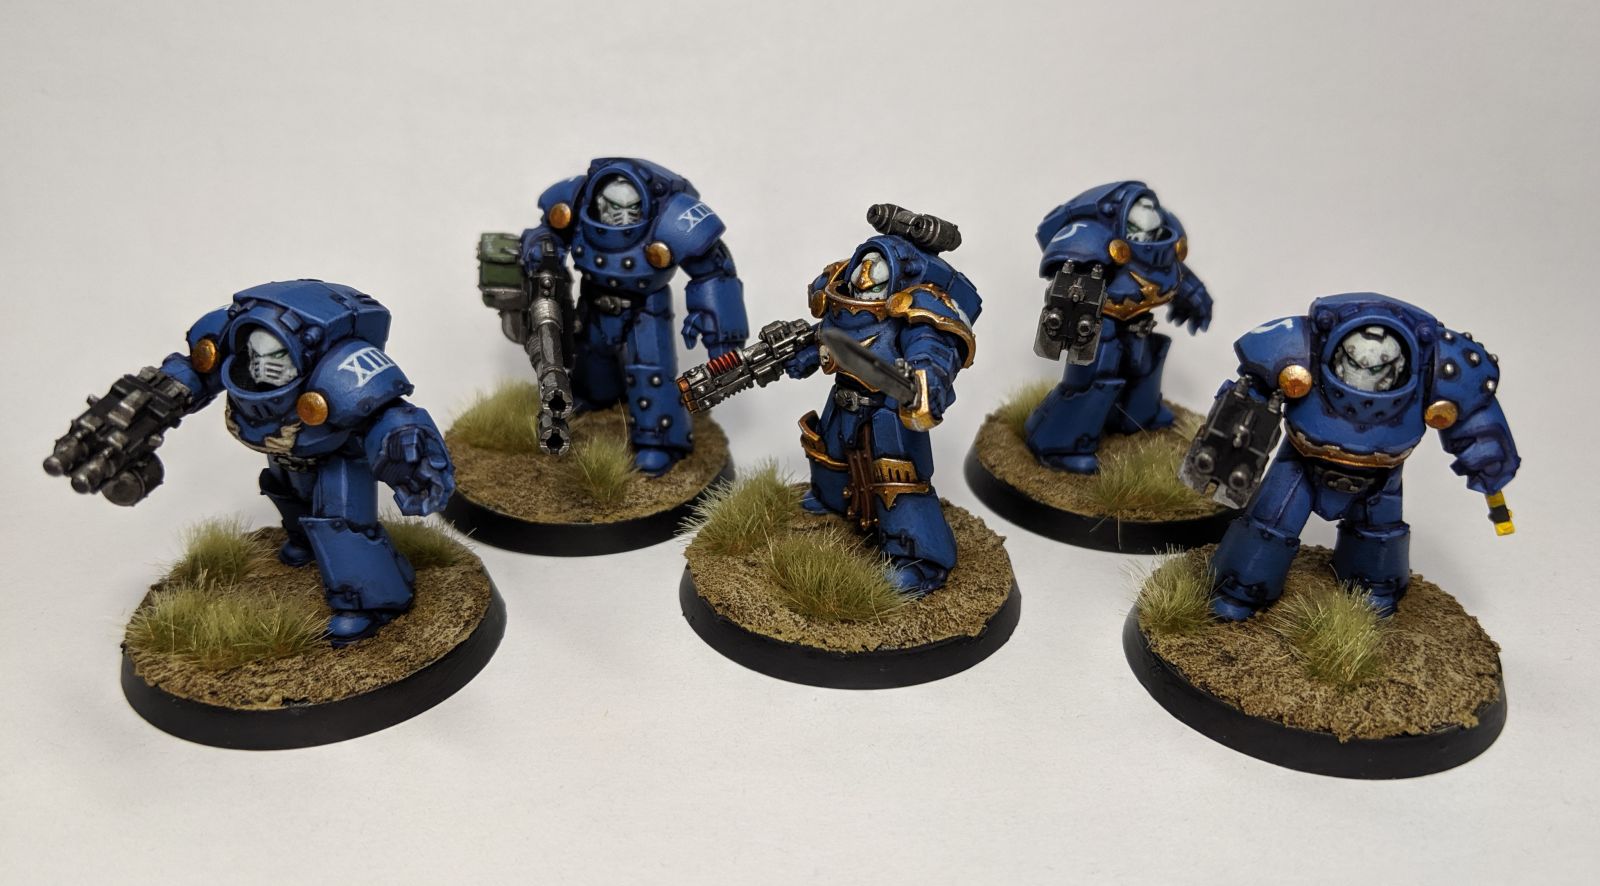 Ultramarines - The Bolter and Chainsword